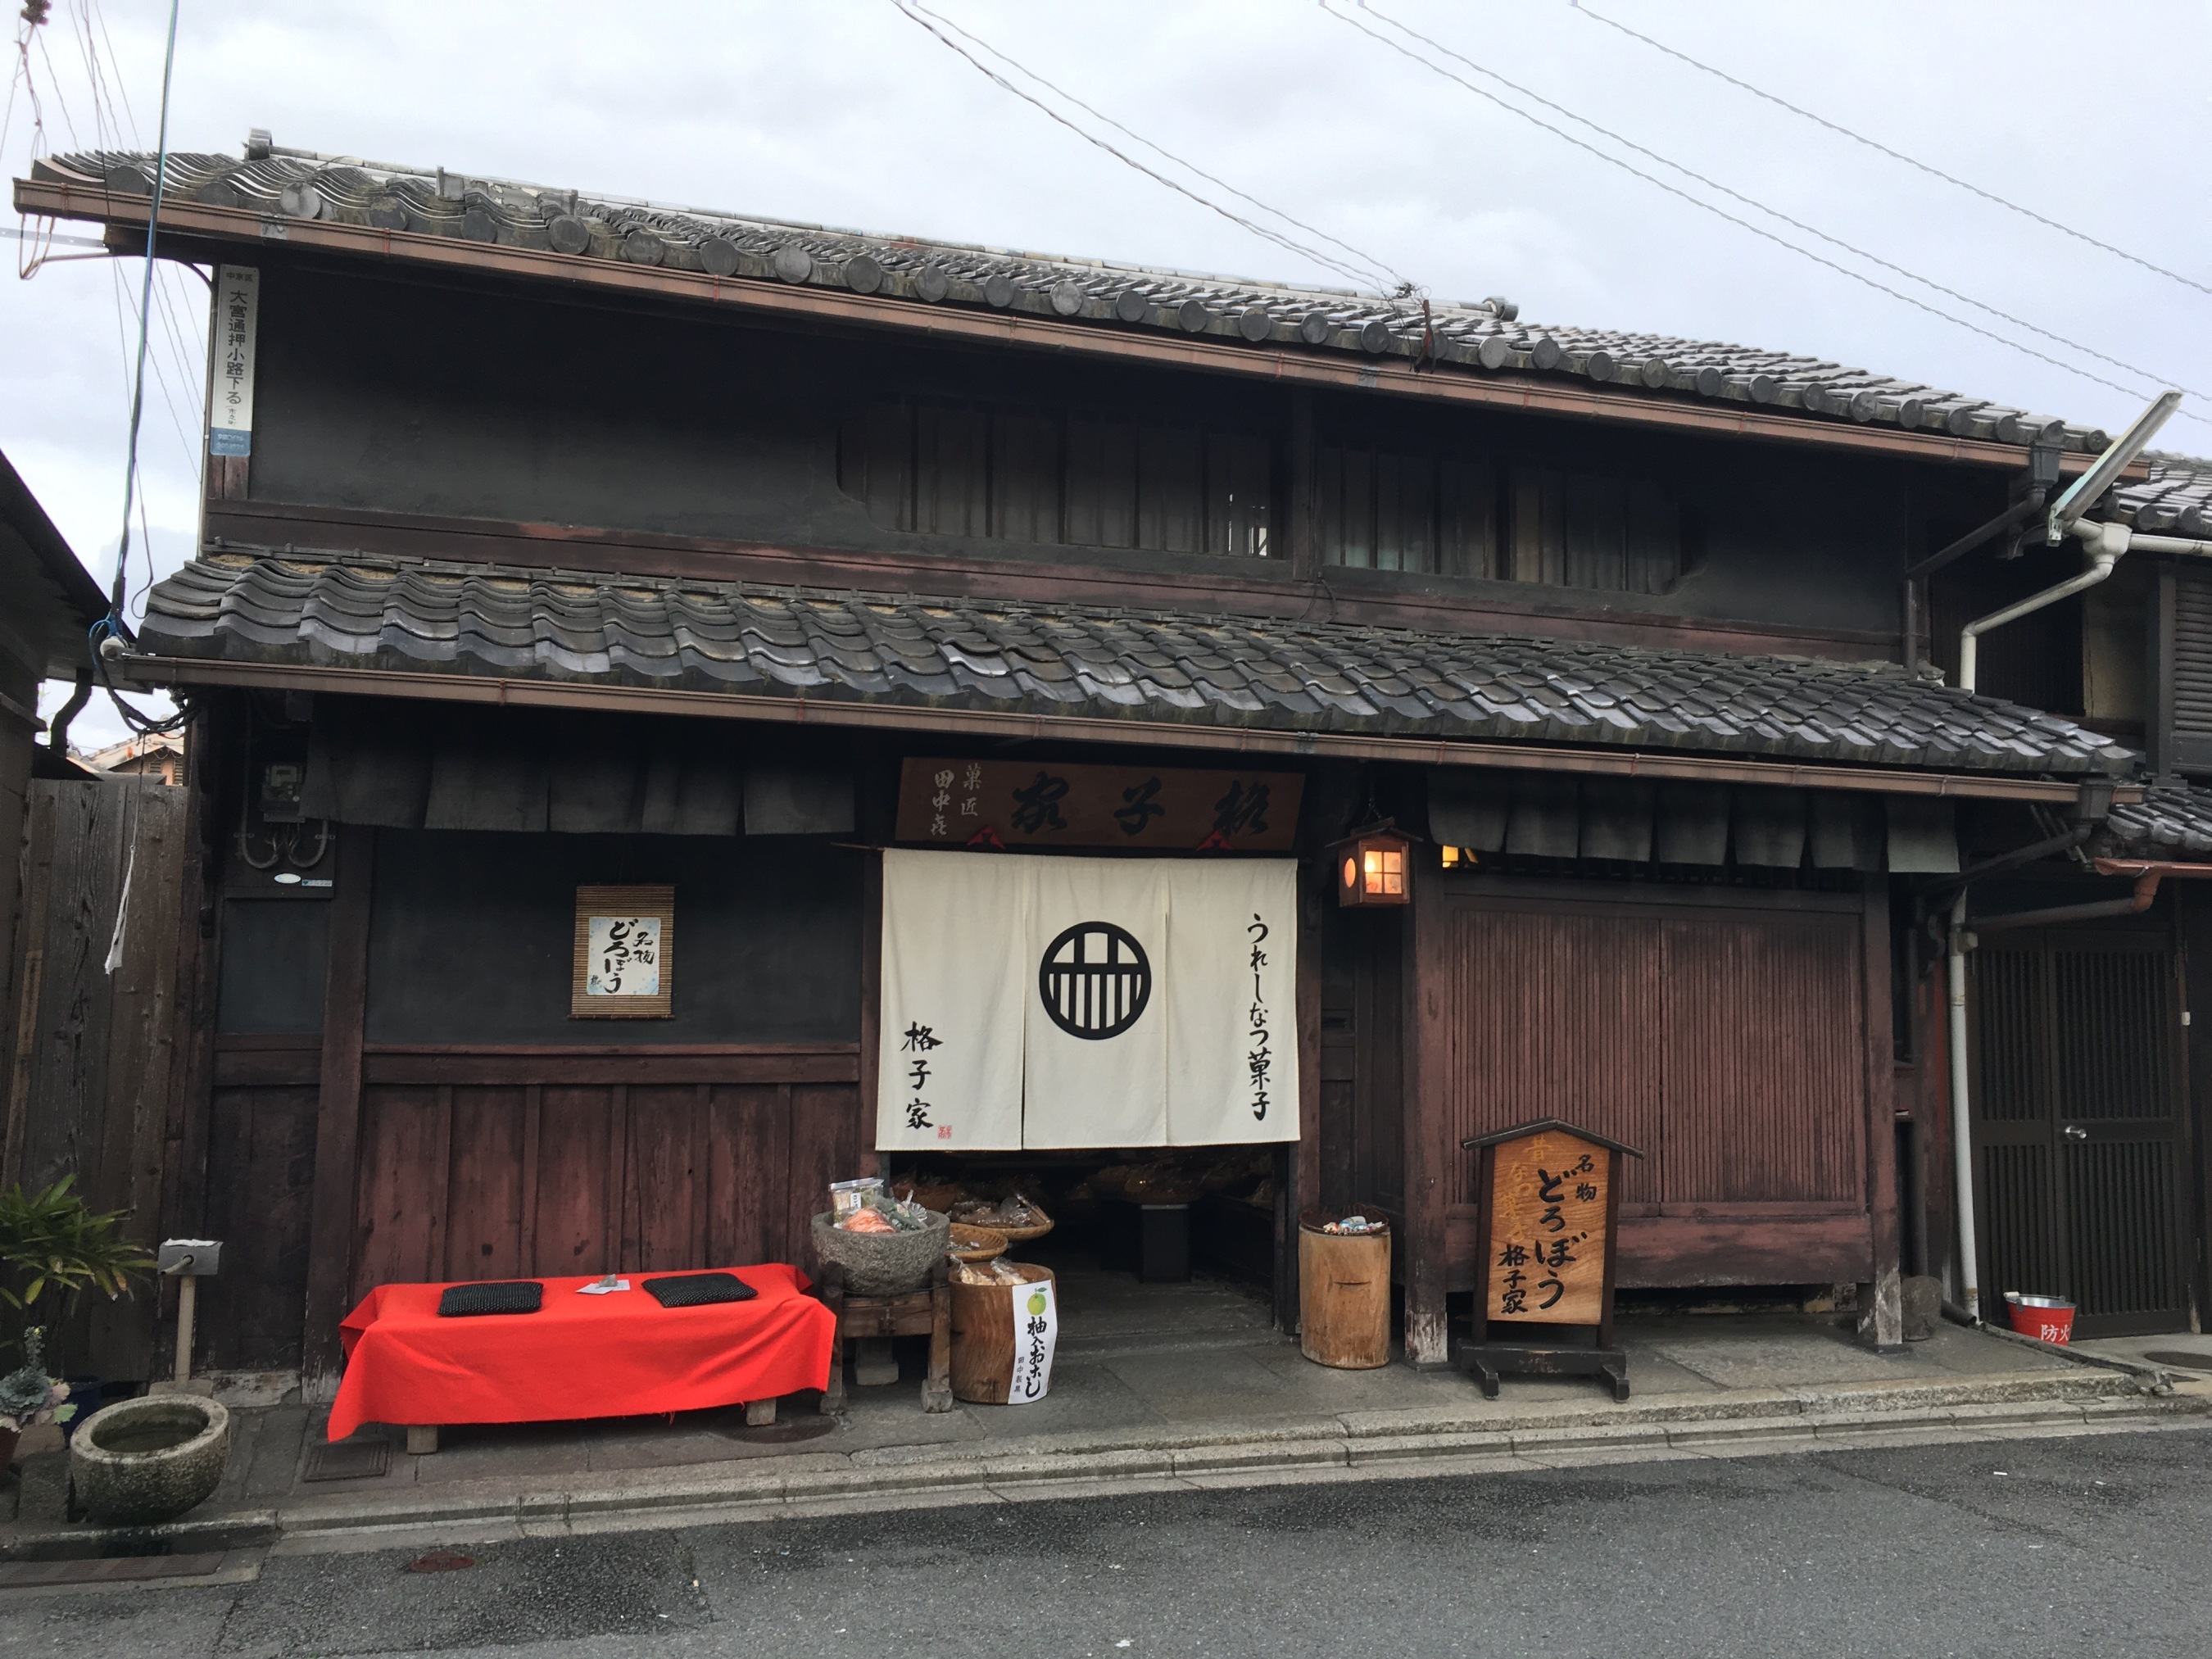 This sweet shop in Nijo trades from a traditional Japanese house, made largely of wood.